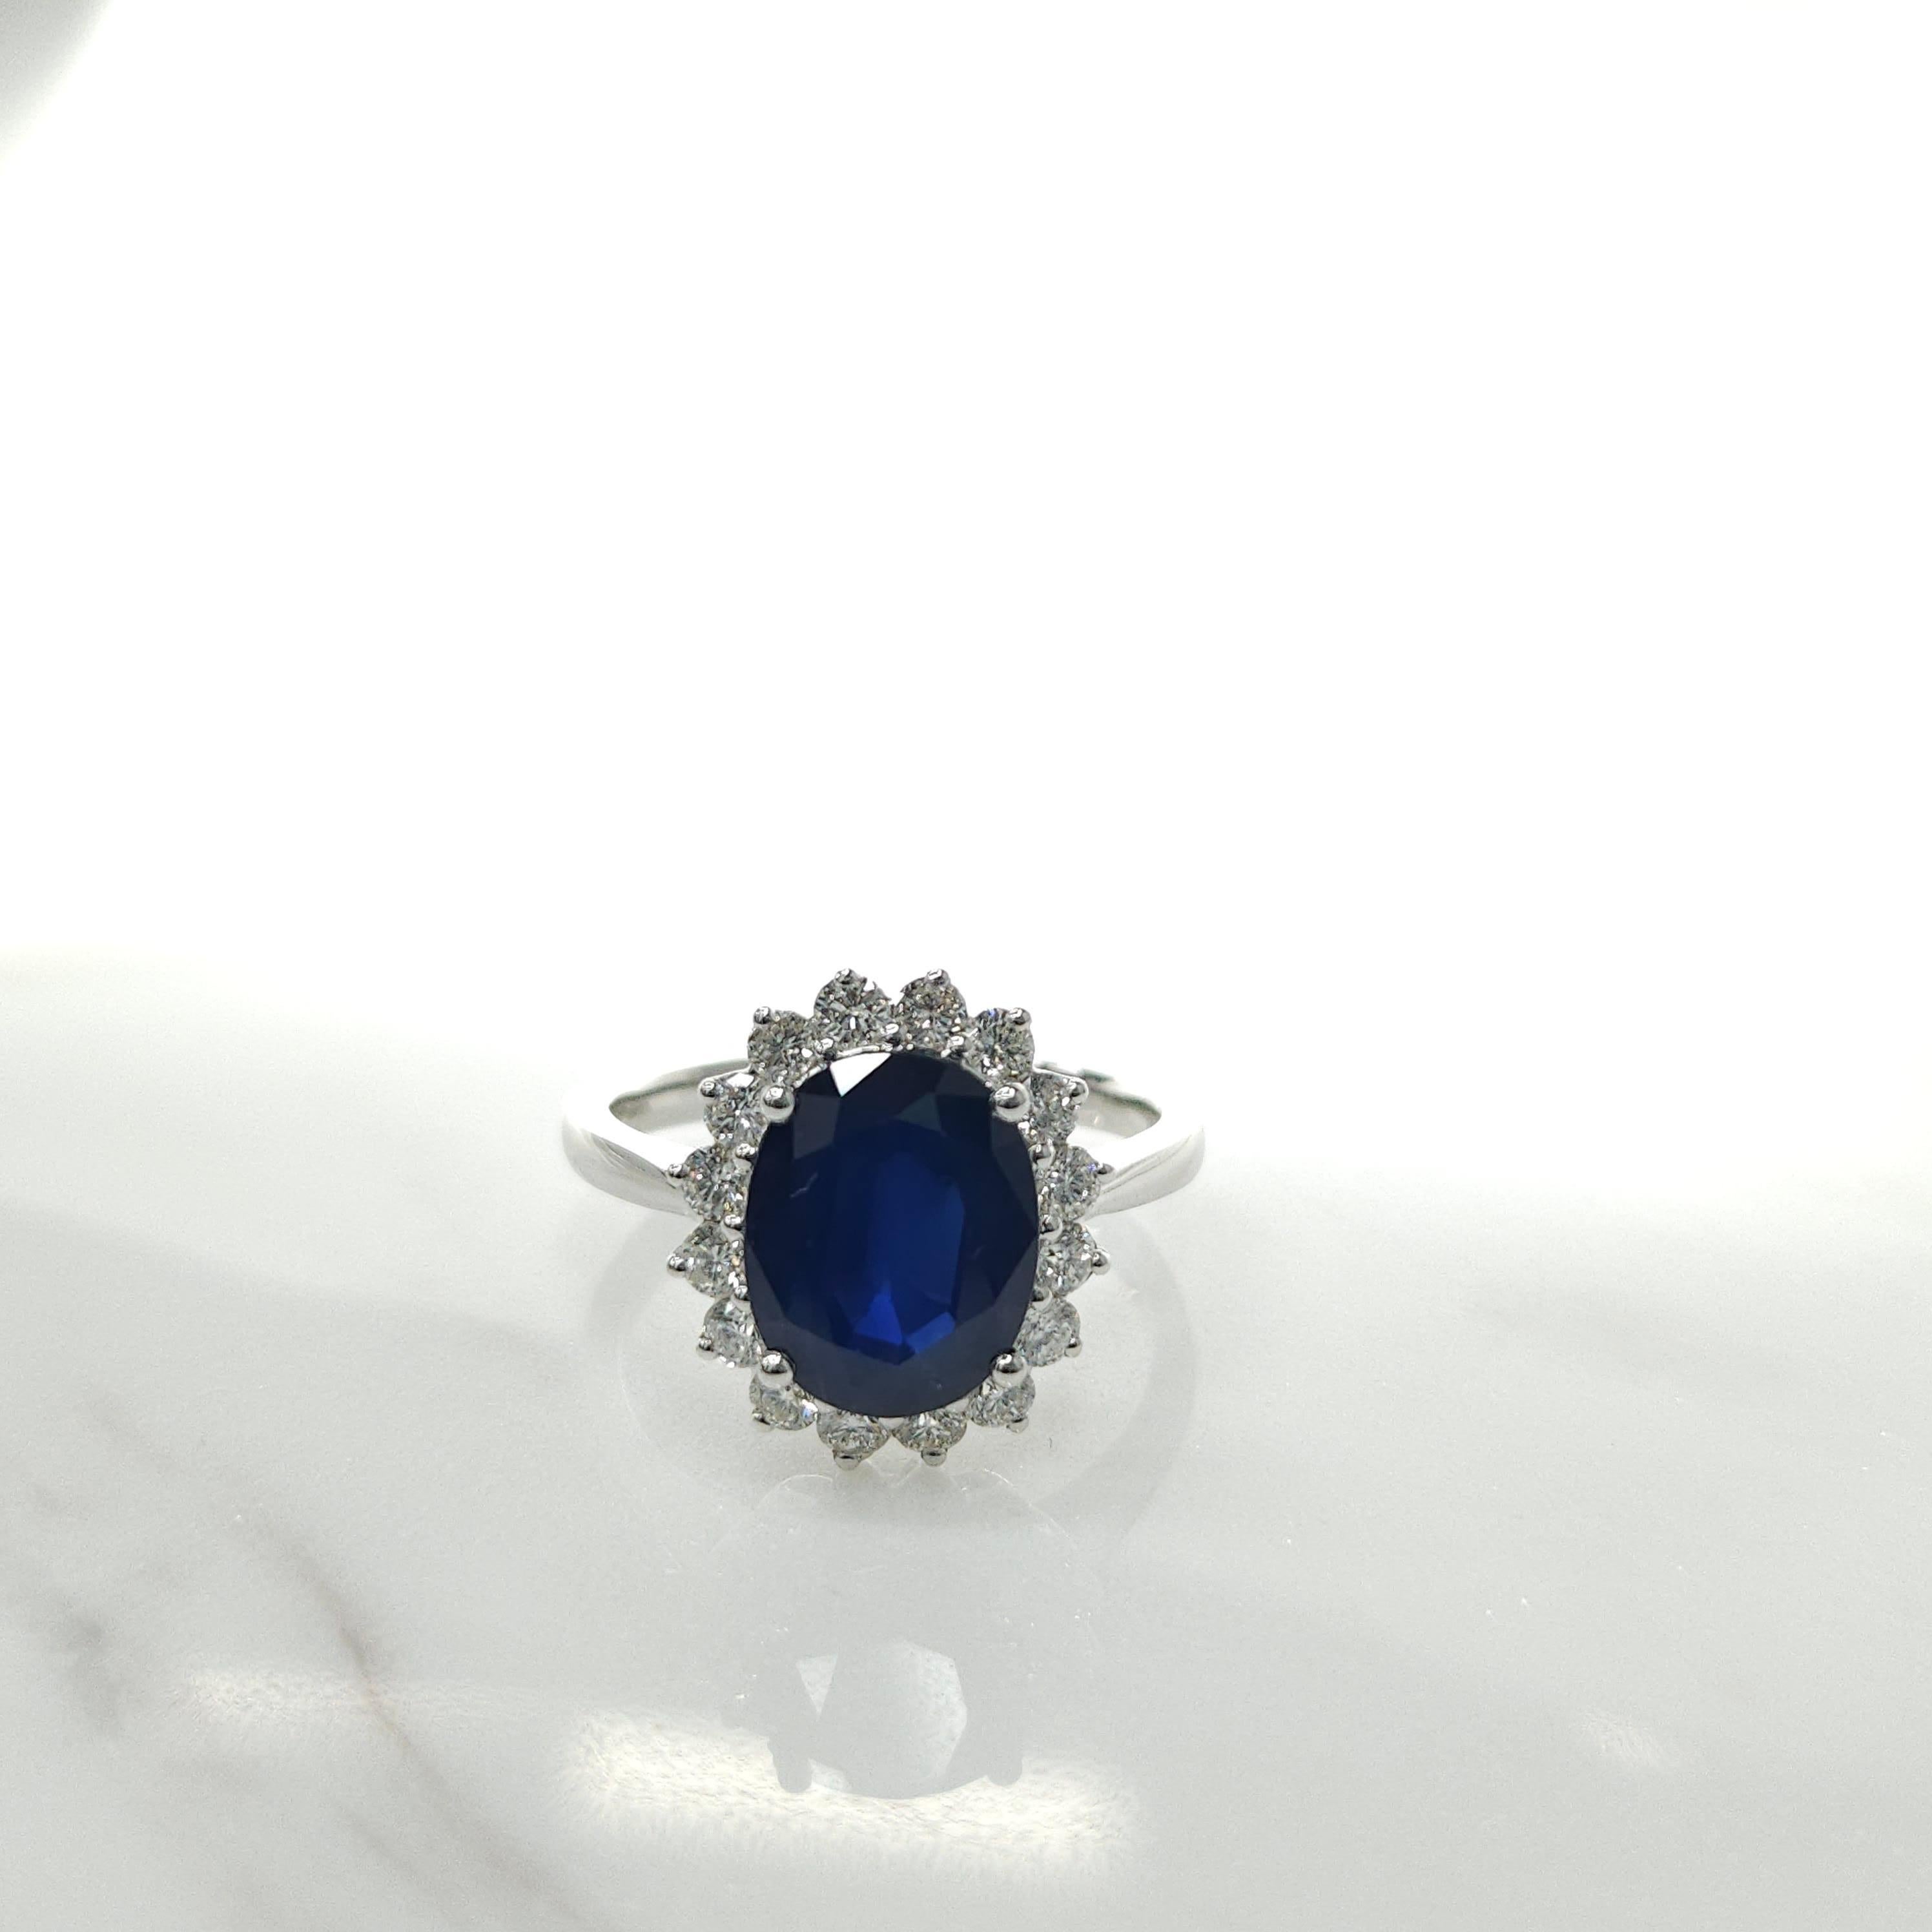 Introducing an extraordinary piece of jewelry, the IGI certified 18K white gold 2.90ct blue sapphire and 0.53ct diamond ring. This stunning ring draws inspiration from the iconic Diana ring, featuring a cluster-style design that exudes elegance and